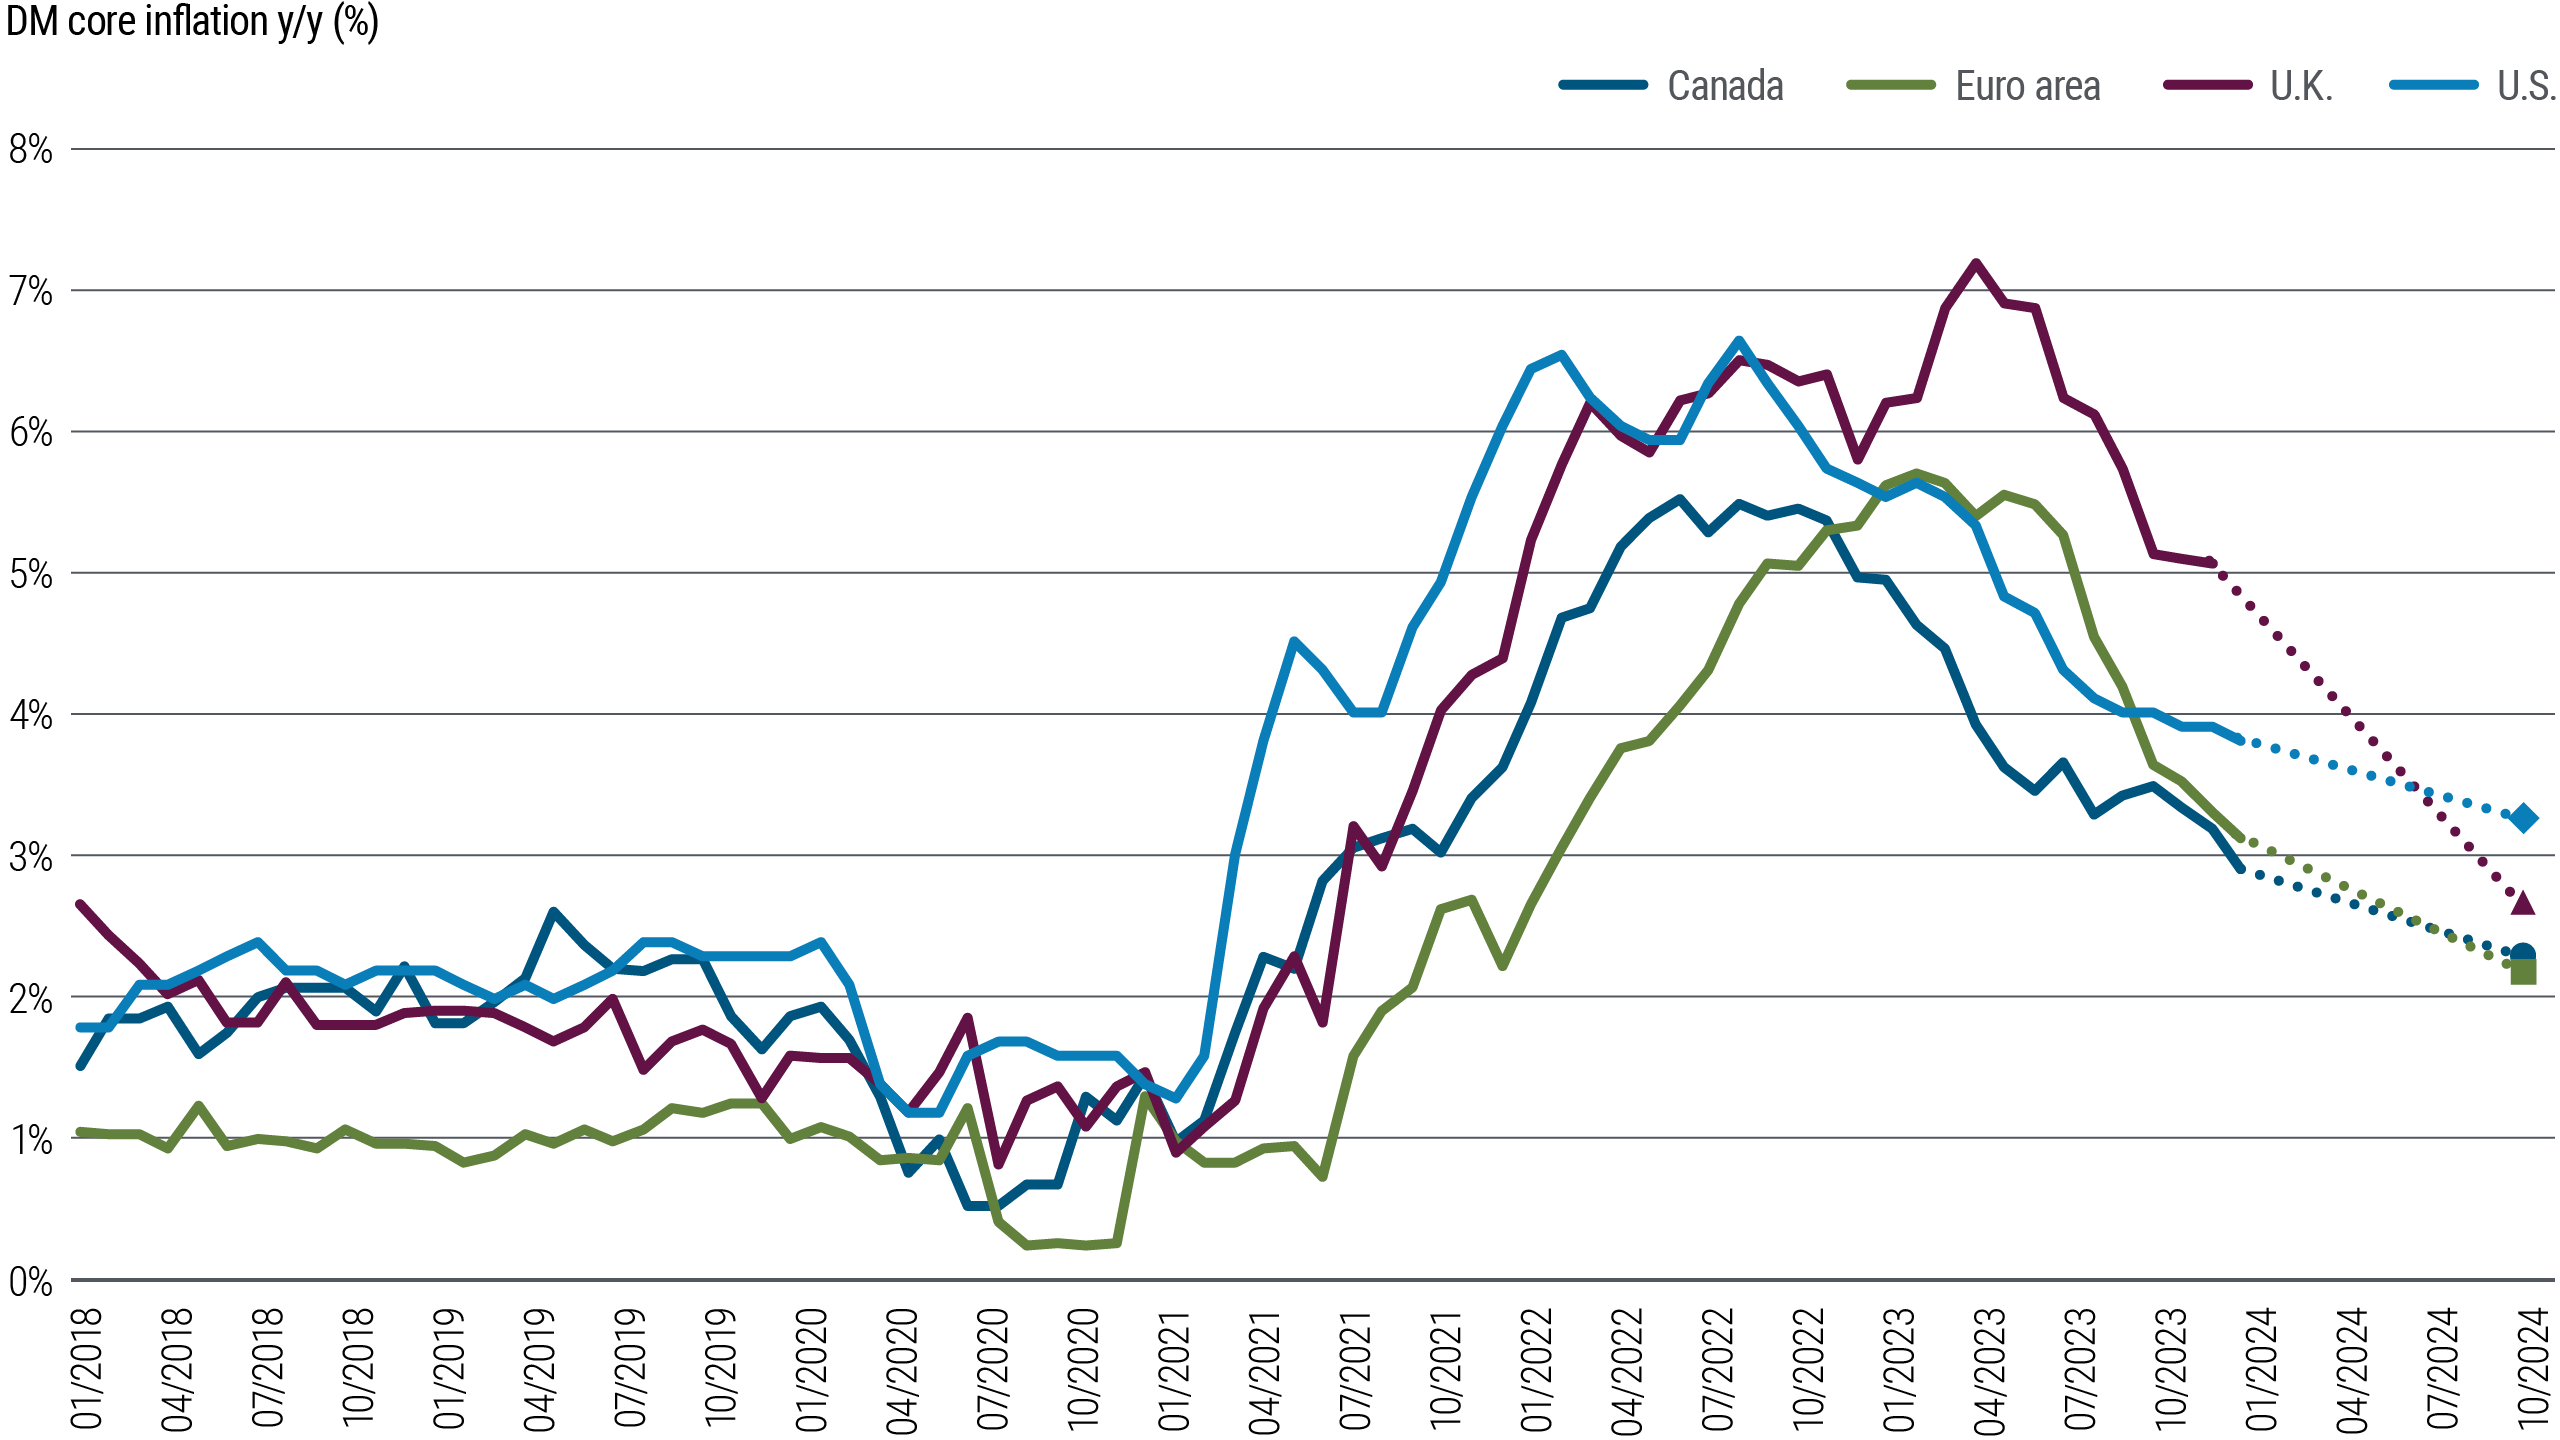 Figure 3 is a line chart comparing year-over-year percentage changes in inflation rates in the U.S., U.K., euro area, and Canada from 2018 through early 2024. Following a swift post-pandemic rise in prices, inflation peaked at different times and different levels, and has since slowed at varying paces in these economies. In the U.S., core Consumer Price Index (CPI) inflation stood at 3.8% as of its latest reading, and PIMCO forecasts it will end 2024 in a range of 3.0%–3.5%. In the euro area, inflation is at 3.1% currently, and PIMCO forecasts it will end 2024 in a range of 2.0%–2.5%.